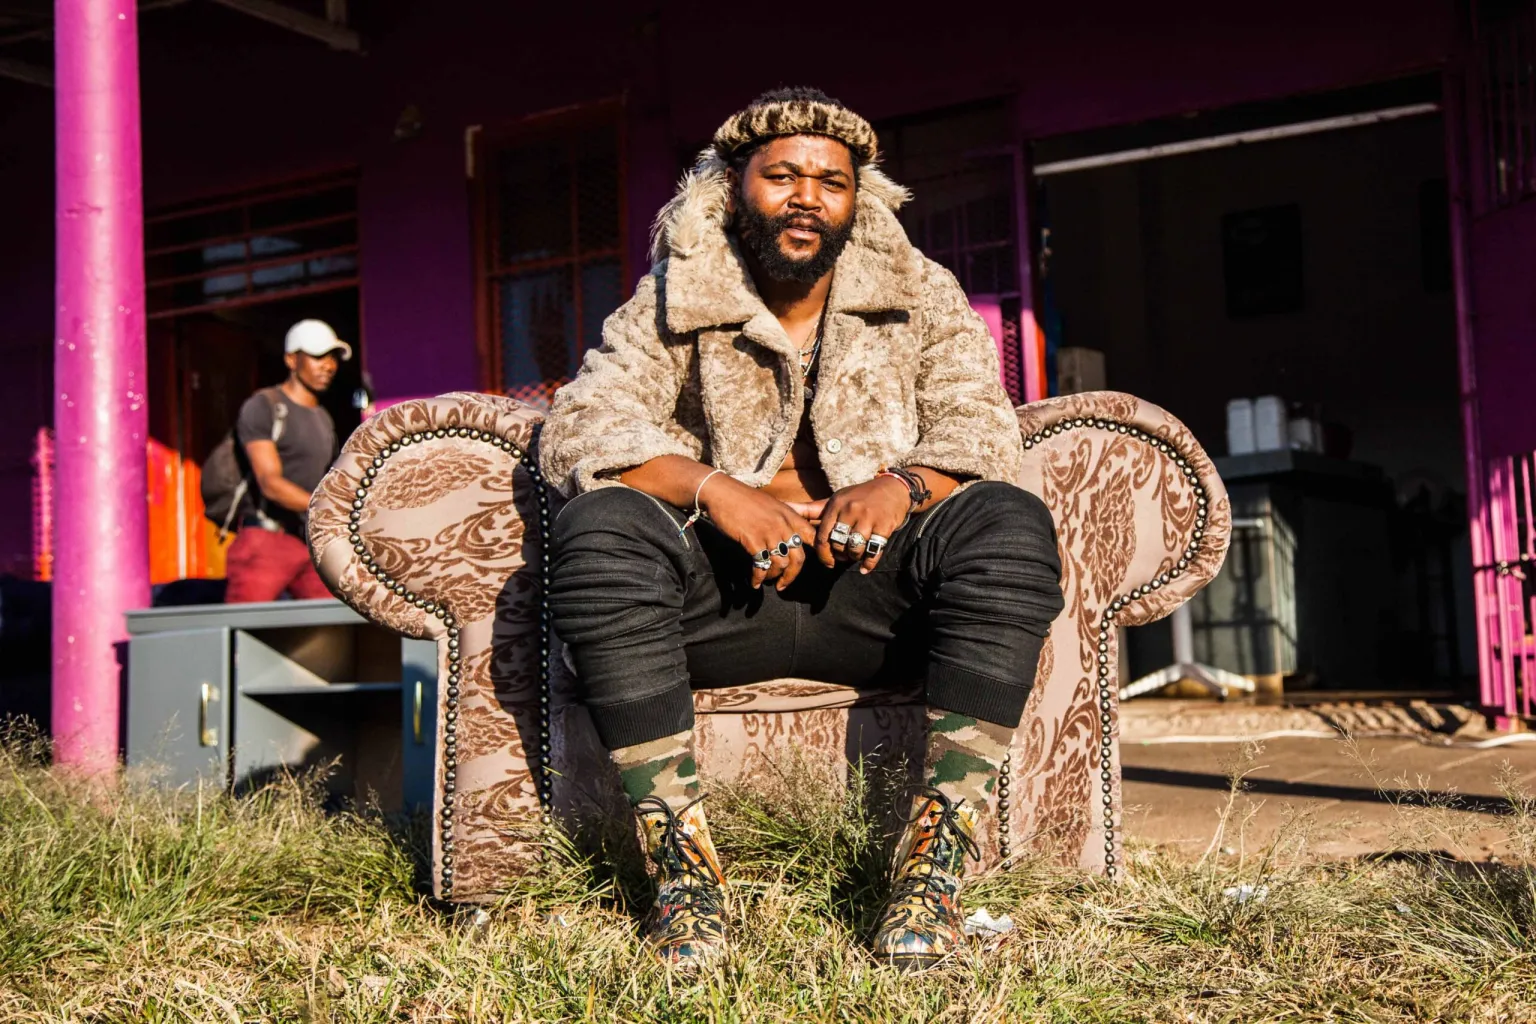 Sjava considered for a Grammy Award